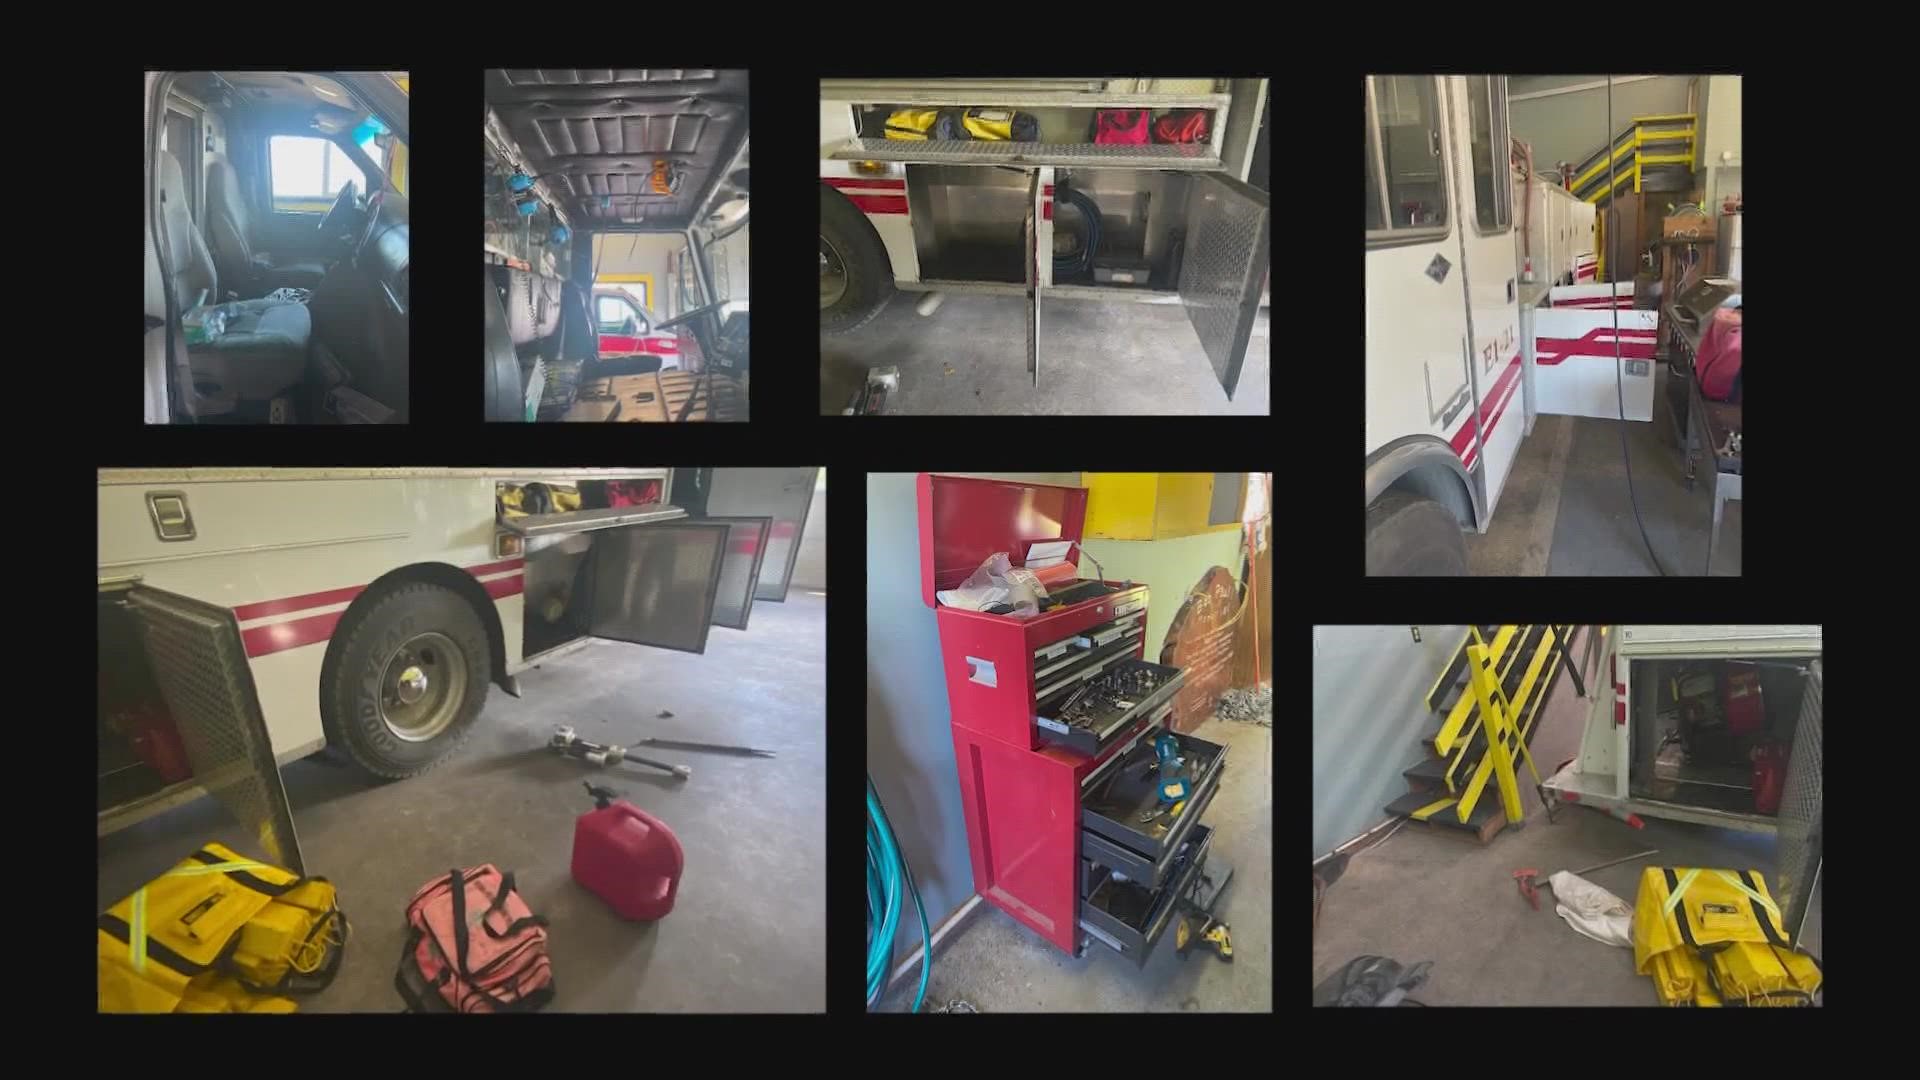 Assistant Chief Hedgers said various life-saving items were stolen including the jaws of life, radios, defibrillators, and rescue tools early Tuesday morning.